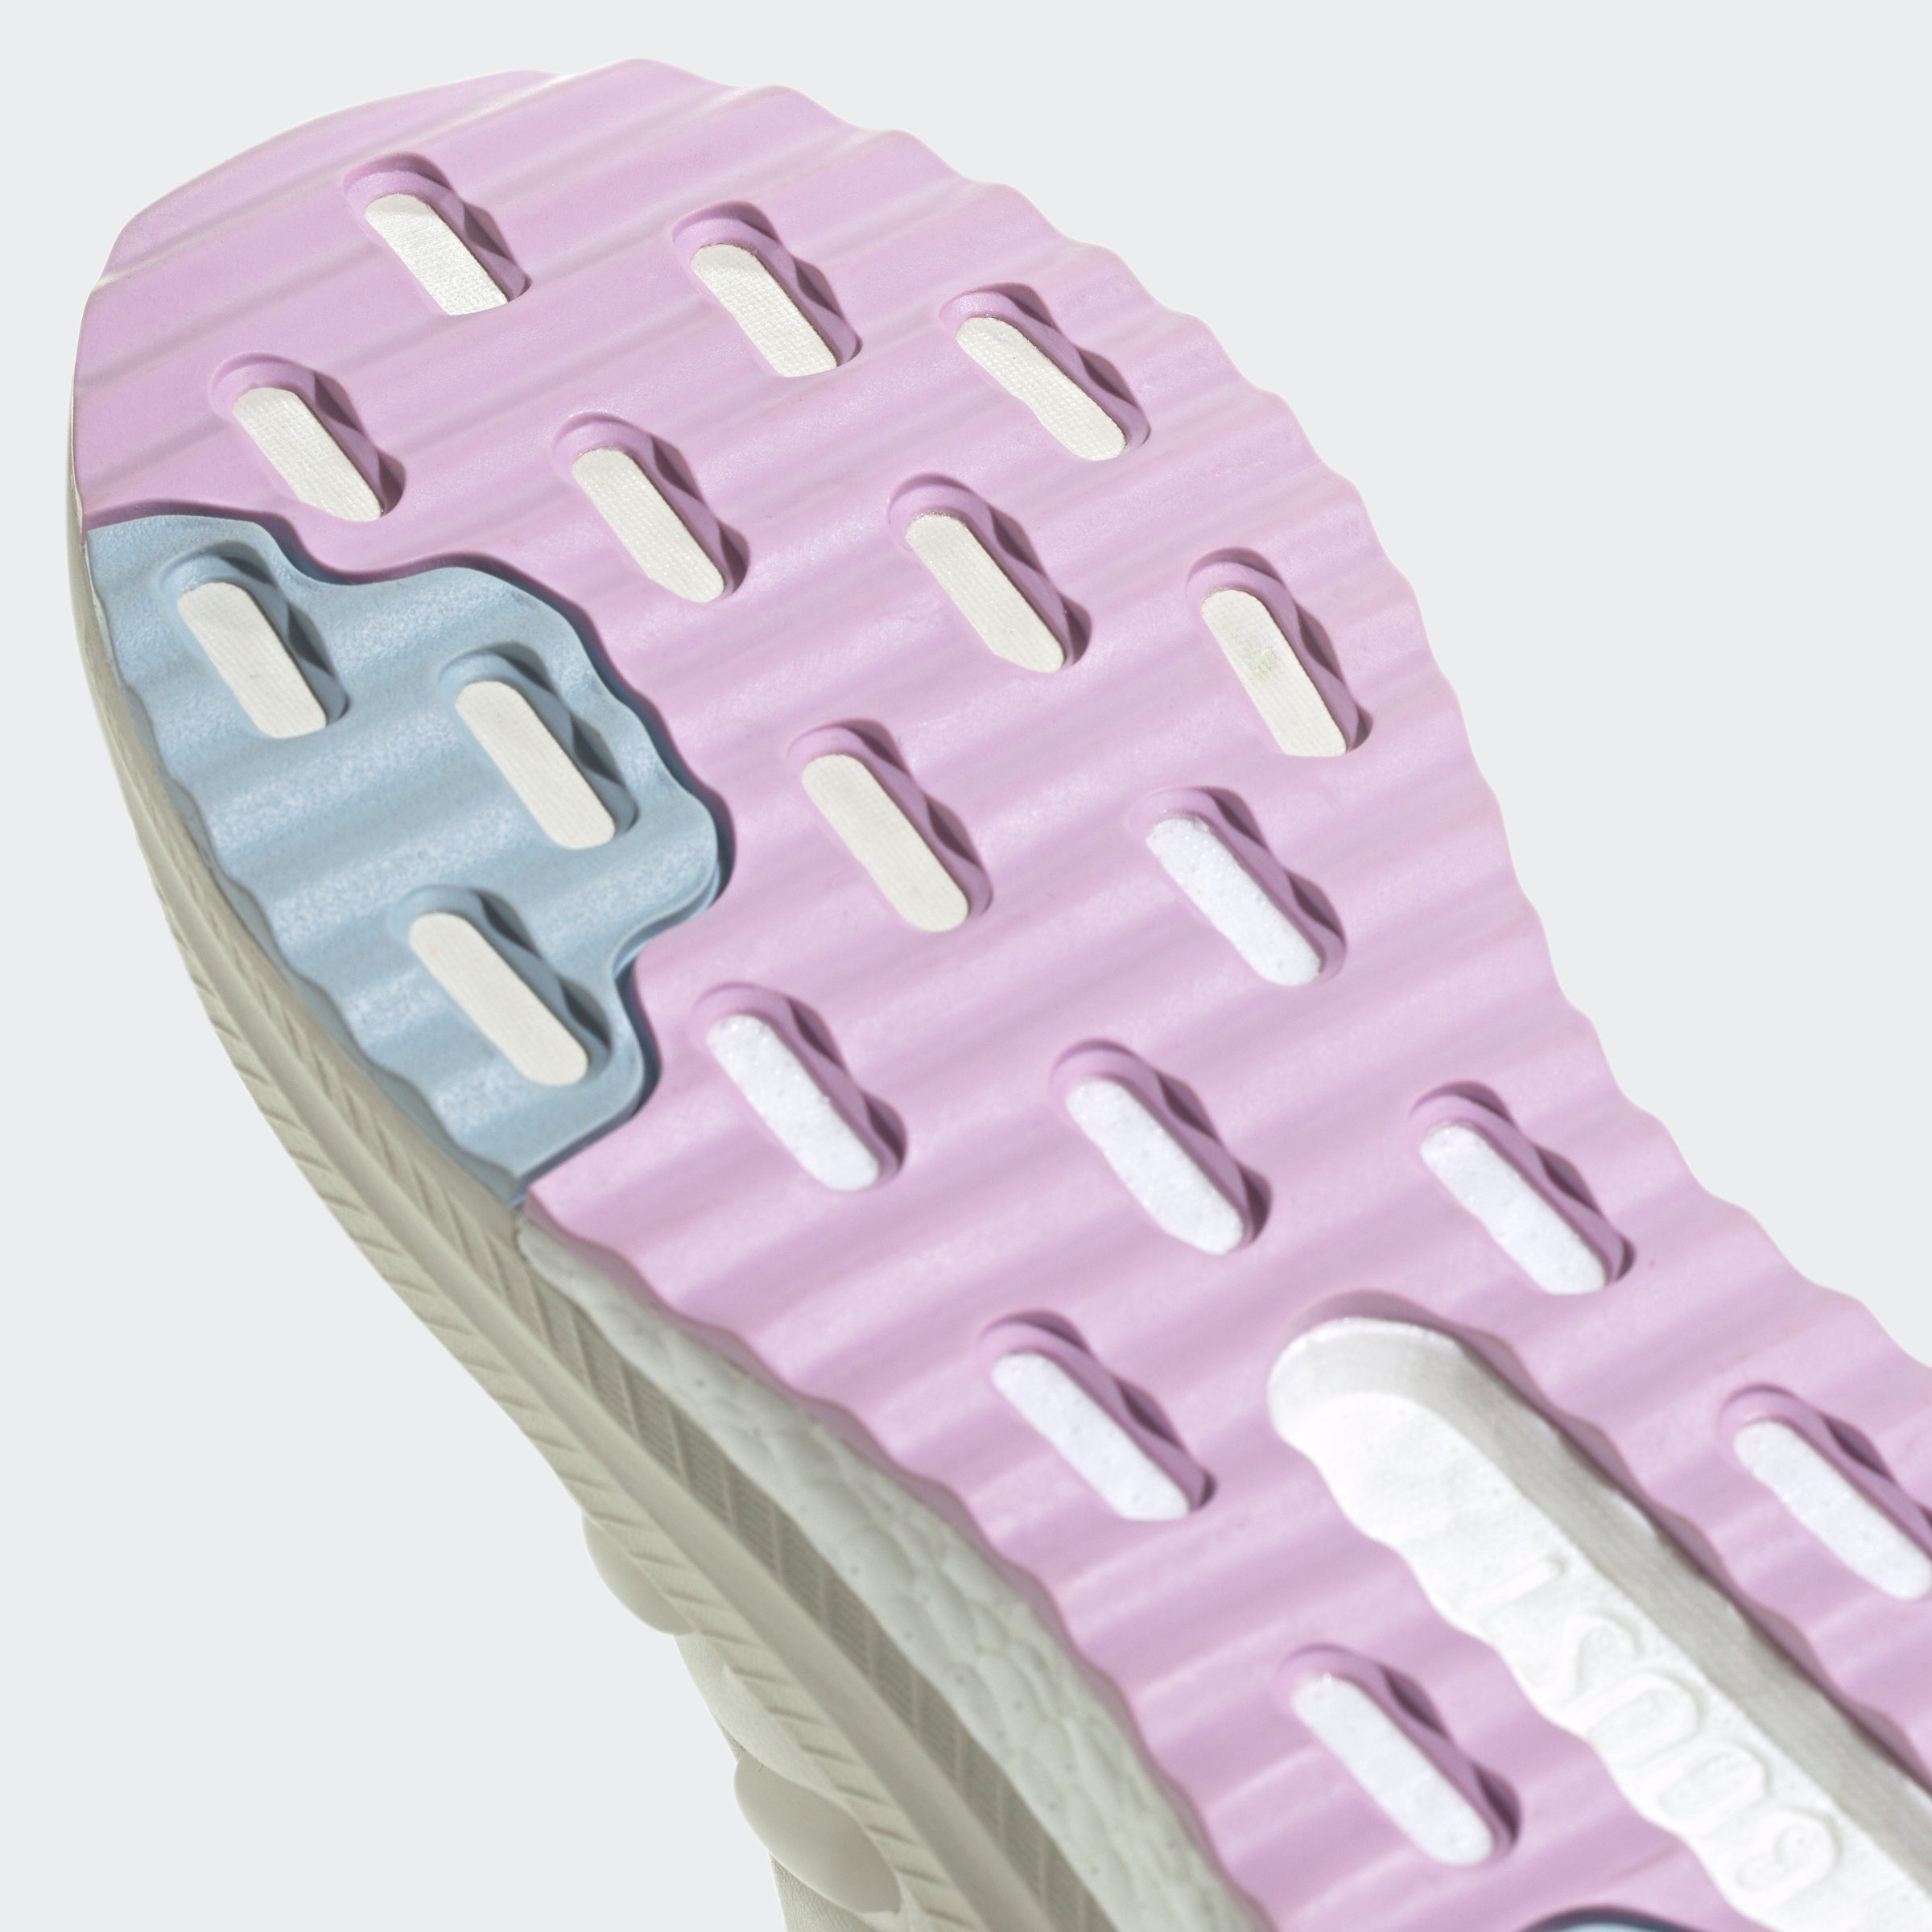 Lilac Off Sportswear Sneaker X_PLR PHASE White / White / adidas Bliss Off